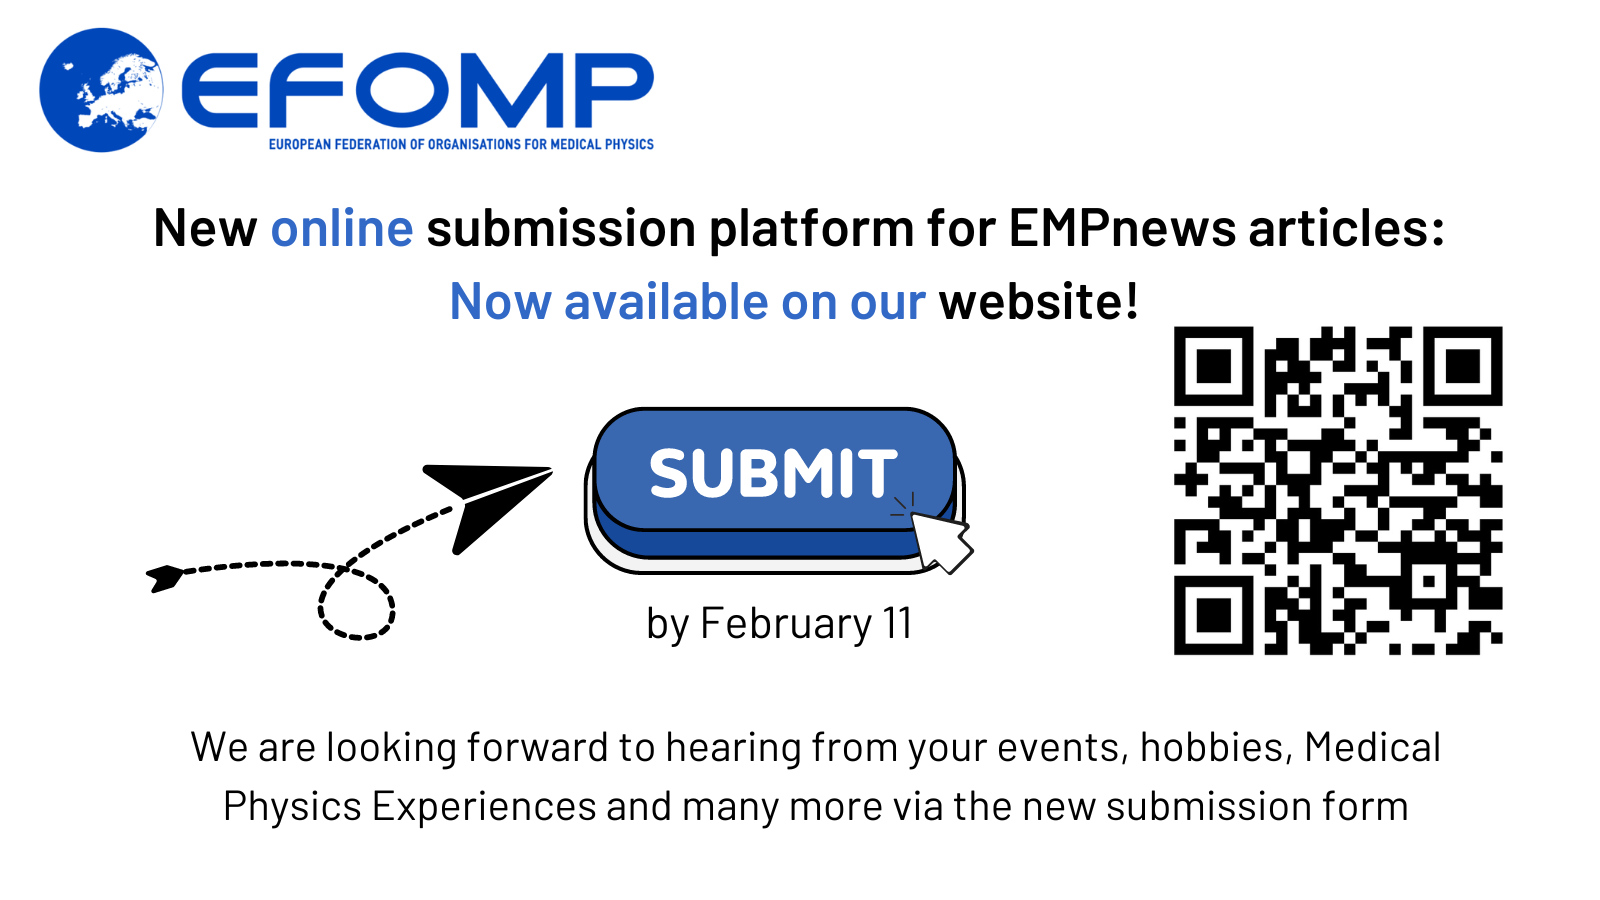 Online submission form for all EMPnews articles!